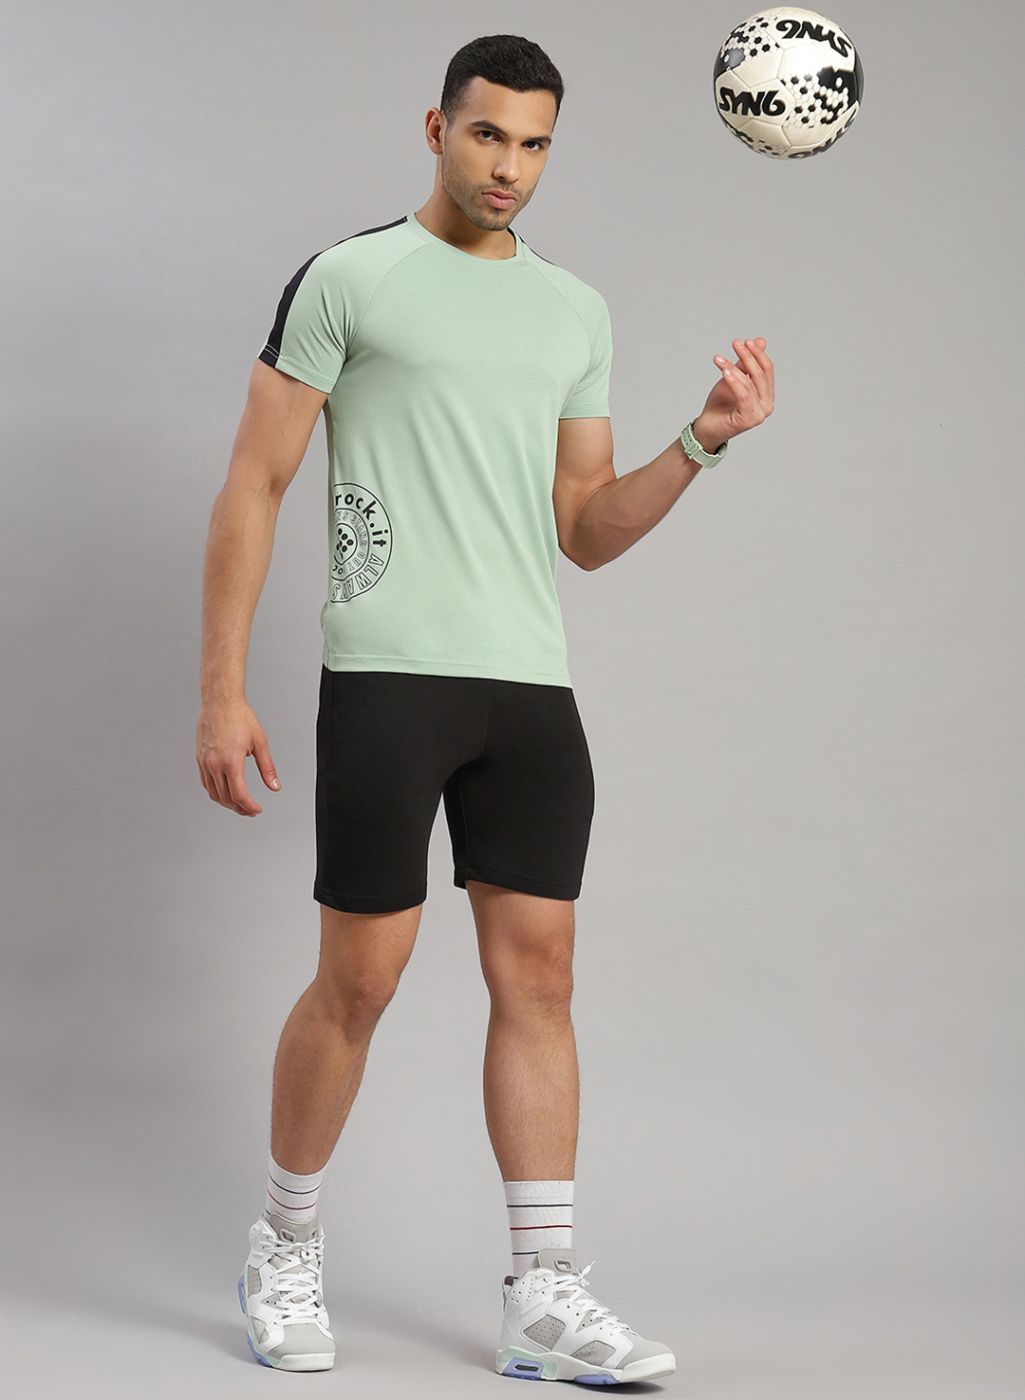 Buy Gym Shirts Online In India -  India